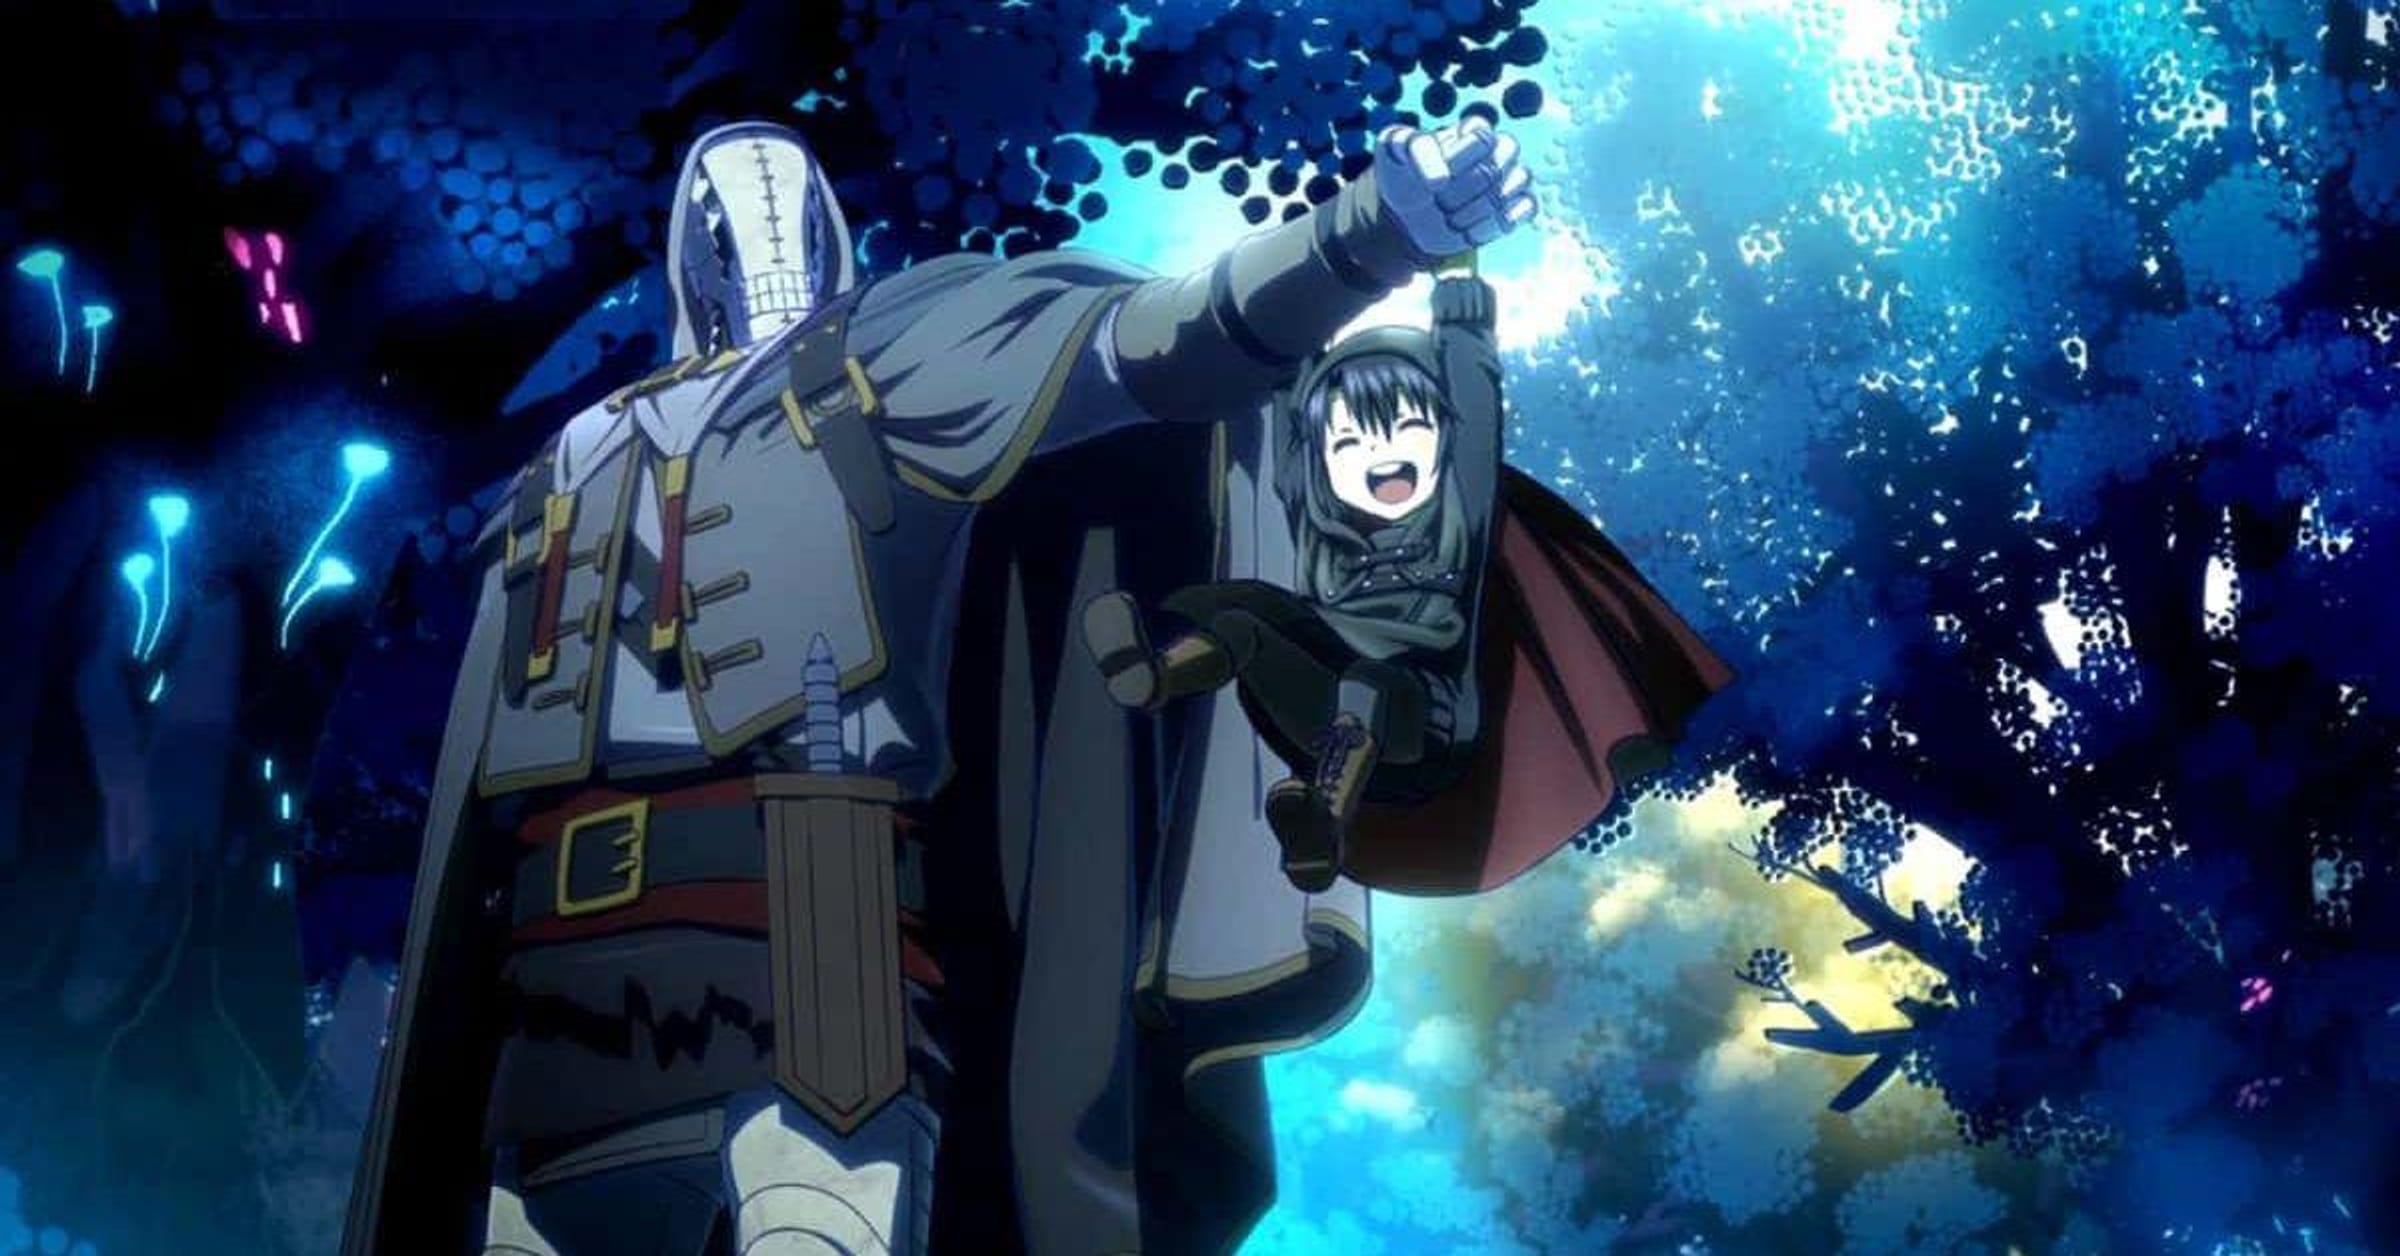 10 Most Underrated Anime, According To Reddit